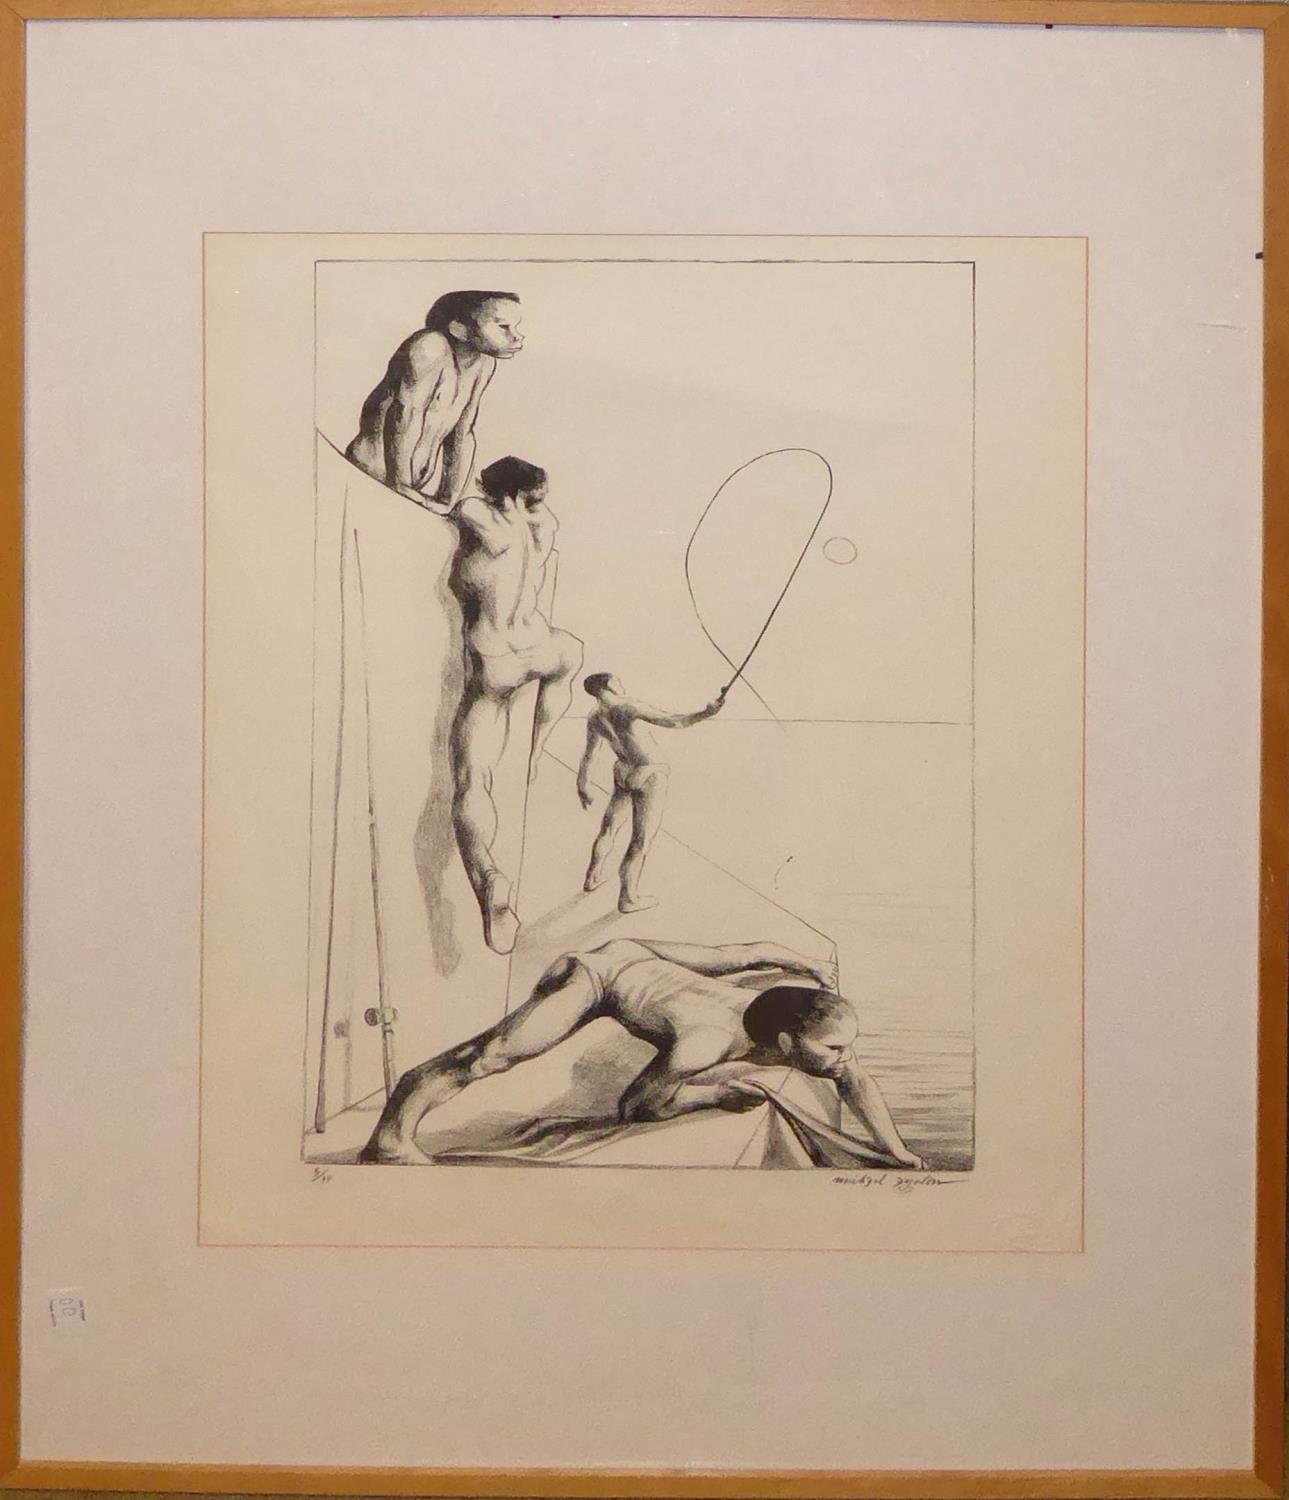 MICHAEL AYRTON, 1921 - 1975, LITOGRAPH (5/10) Titled 'Fishermen', signed, numbered, studio - Image 2 of 3